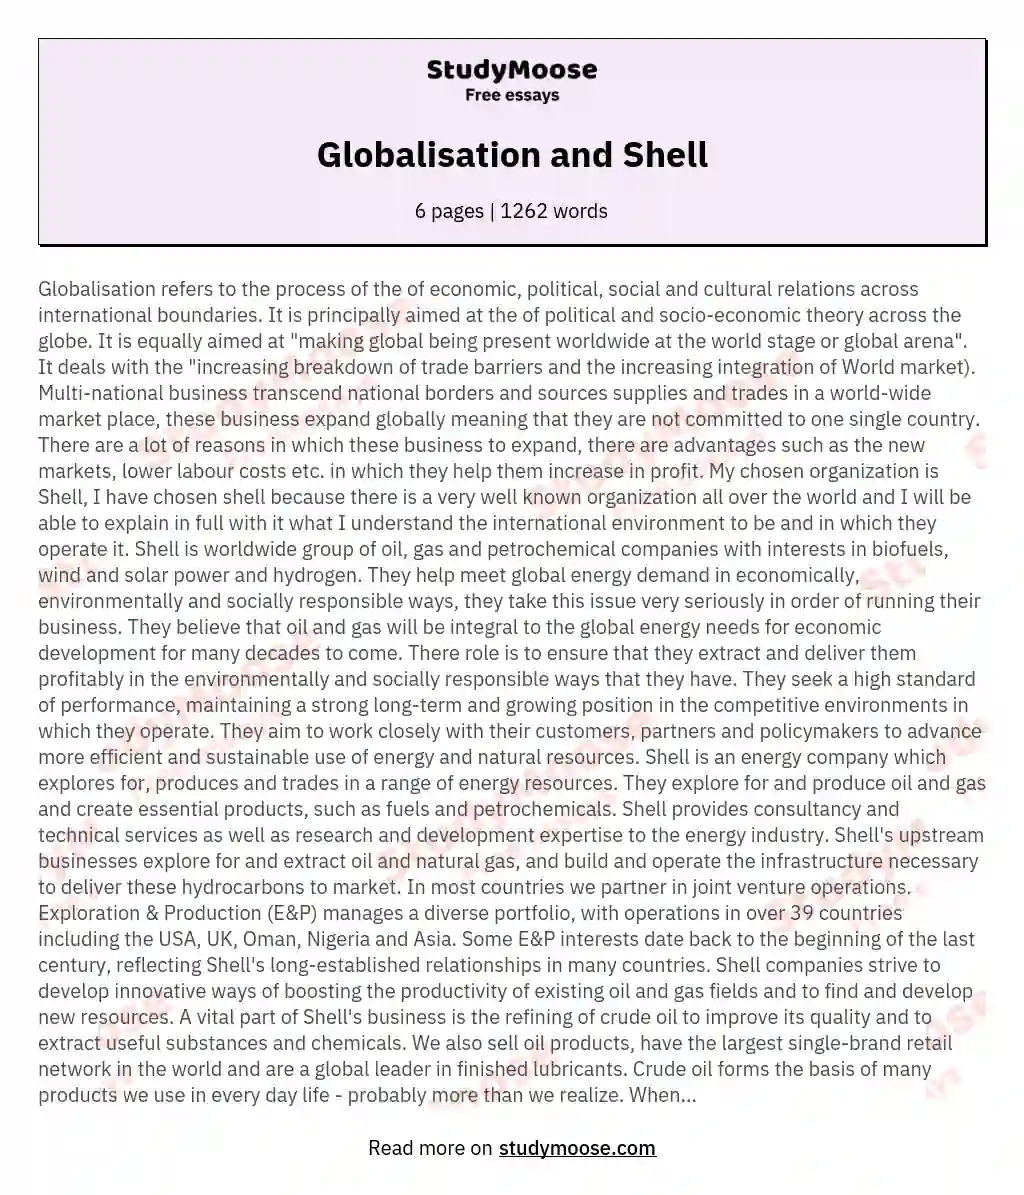 Globalisation and Shell essay